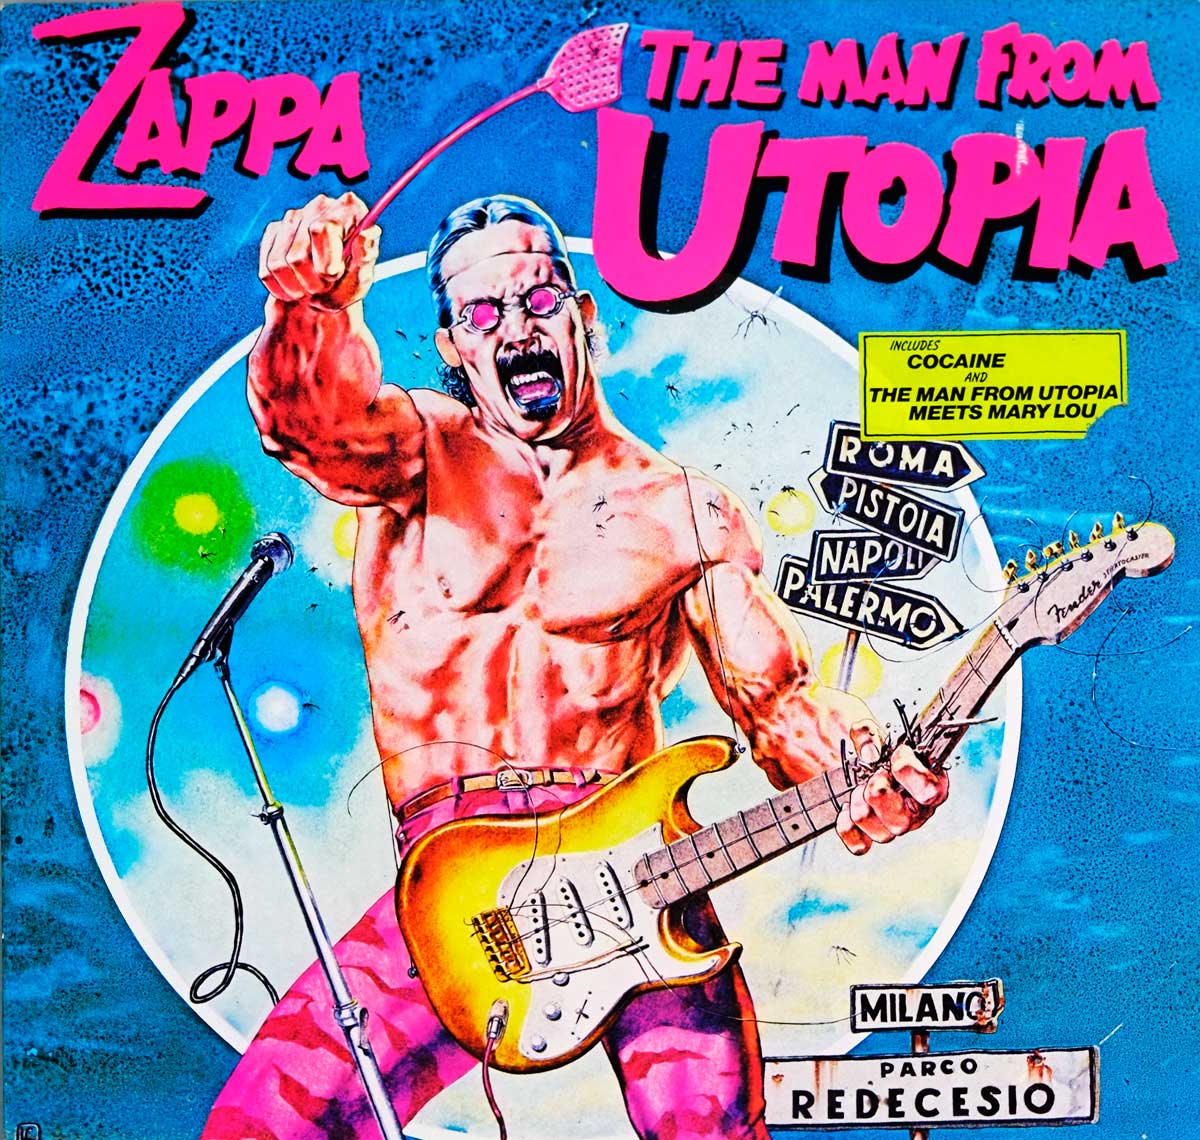 large photo of man from utopia front cover